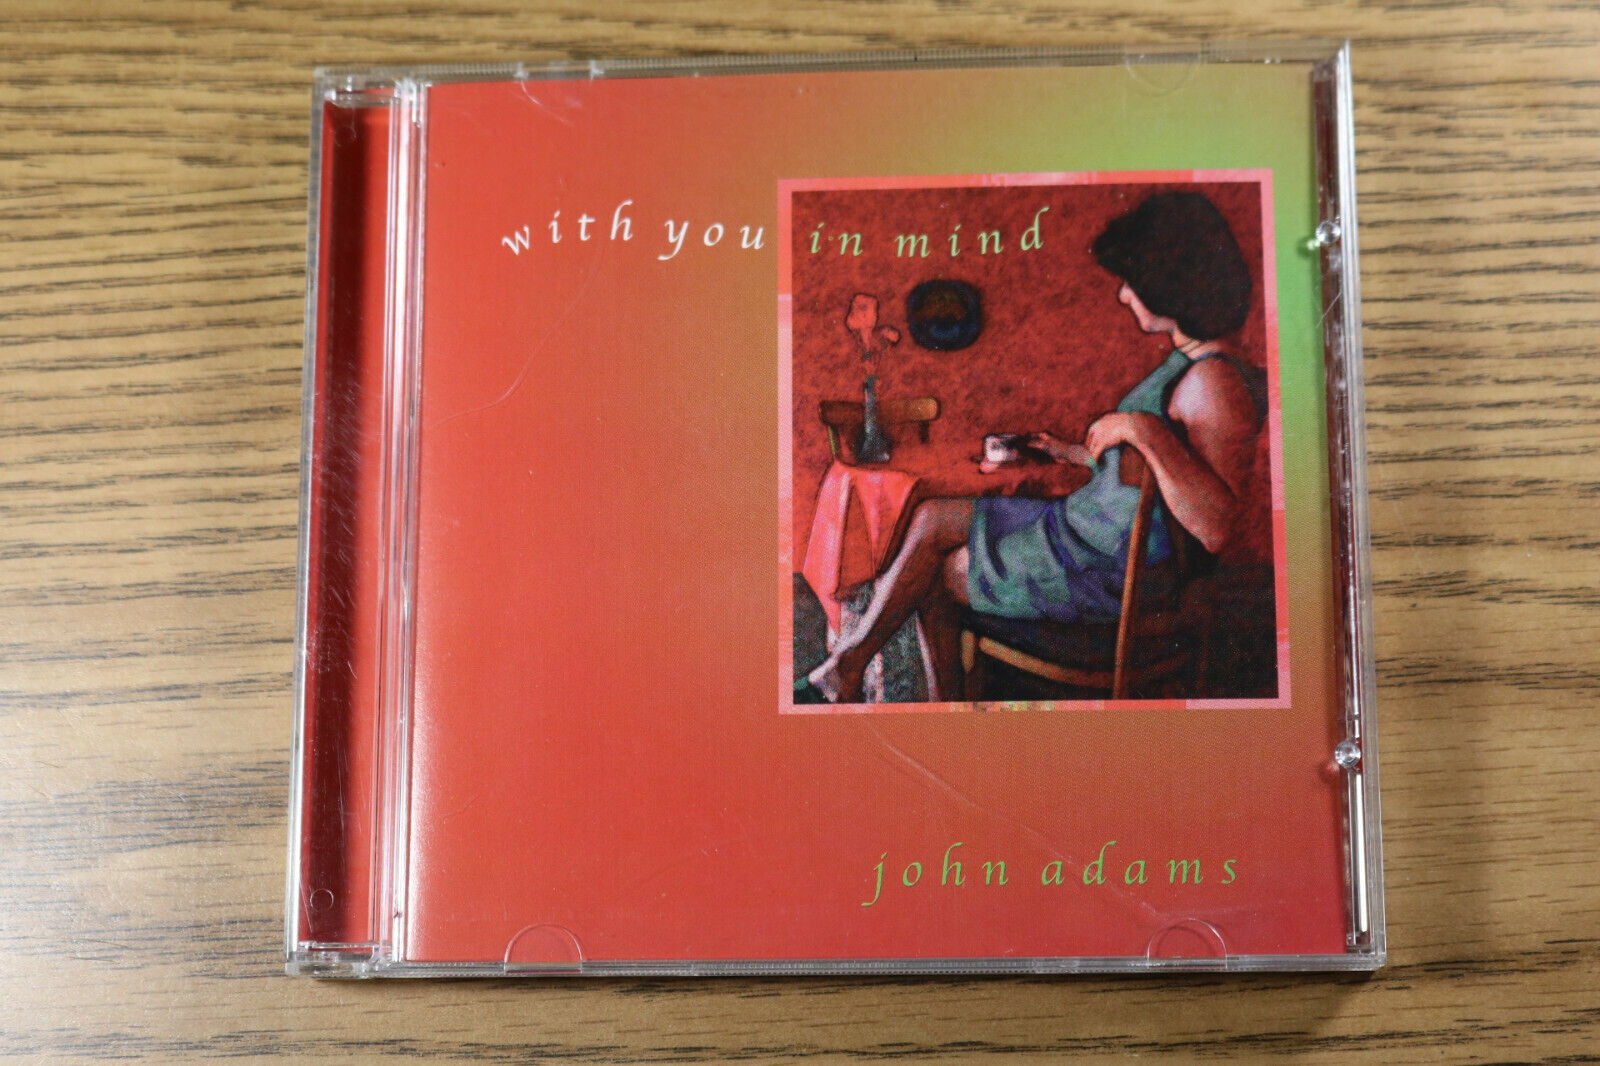 Used CD - John Adams With You In Mind 2001 Congruent CMC-6954